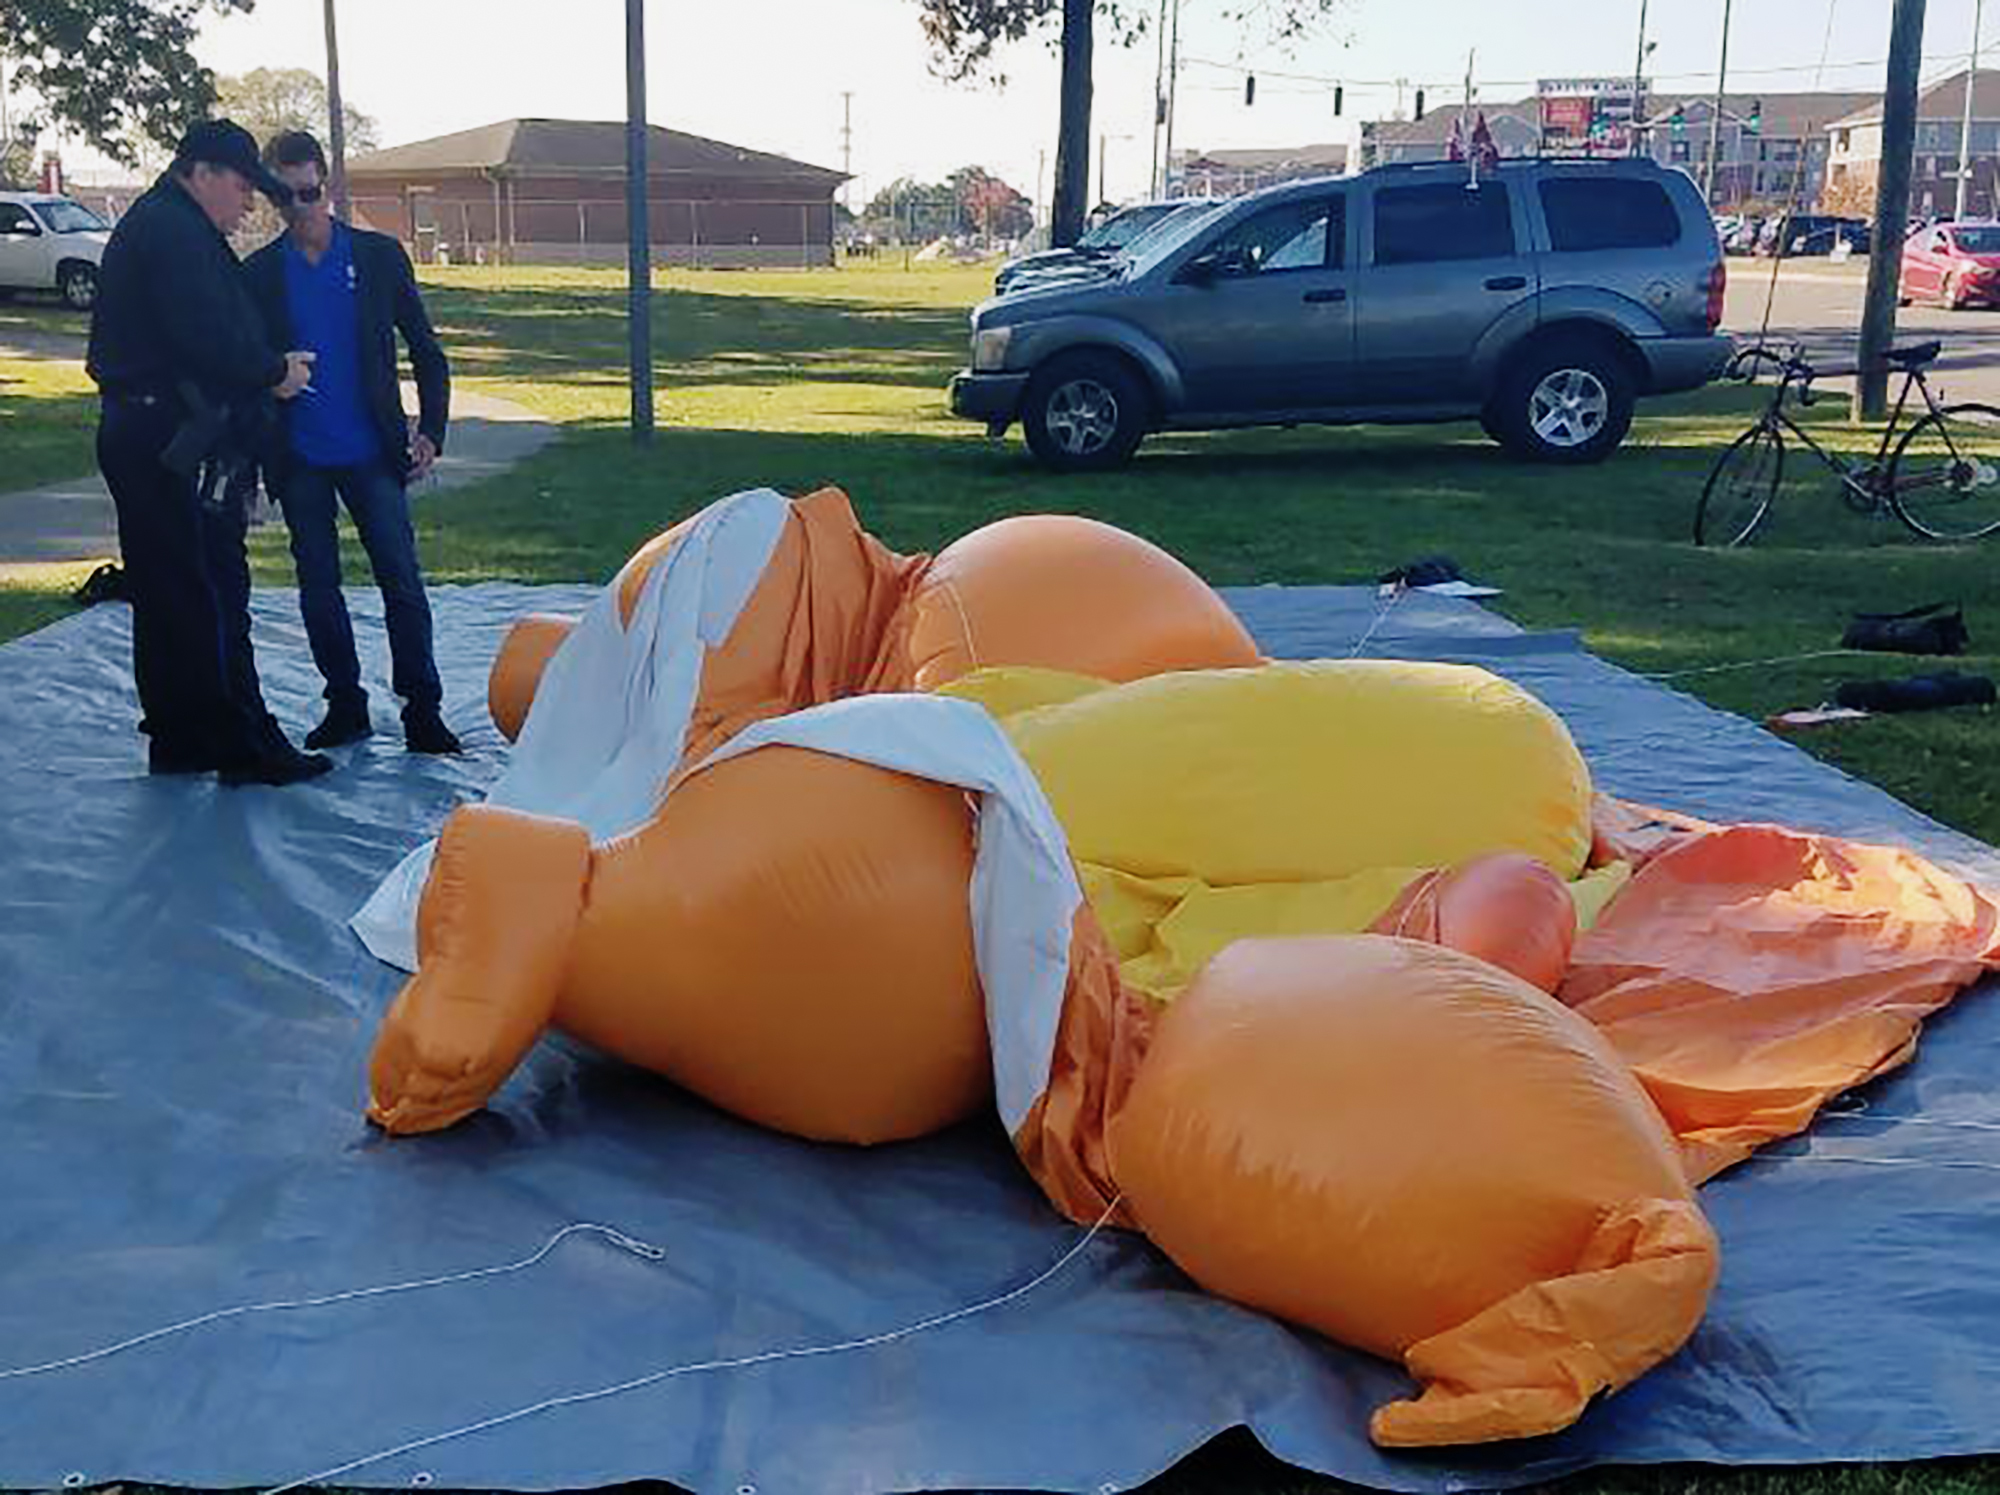 A responding officer and an unidentified man stands by a Baby Trump balloon deflated by someone at Monnish Park as people were protesting President Donald Trump's visit to an NCAA college football game between Louisiana State and Alabama playing nearby in Tuscaloosa, Ala., Saturday, Nov. 9, 2019. The towering Baby Trump protest balloon was knifed and deflated by someone unhappy with its appearance during Trump's trip to Alabama, organizers said. (Stephanie Taylor/The Tuscaloosa News via AP)